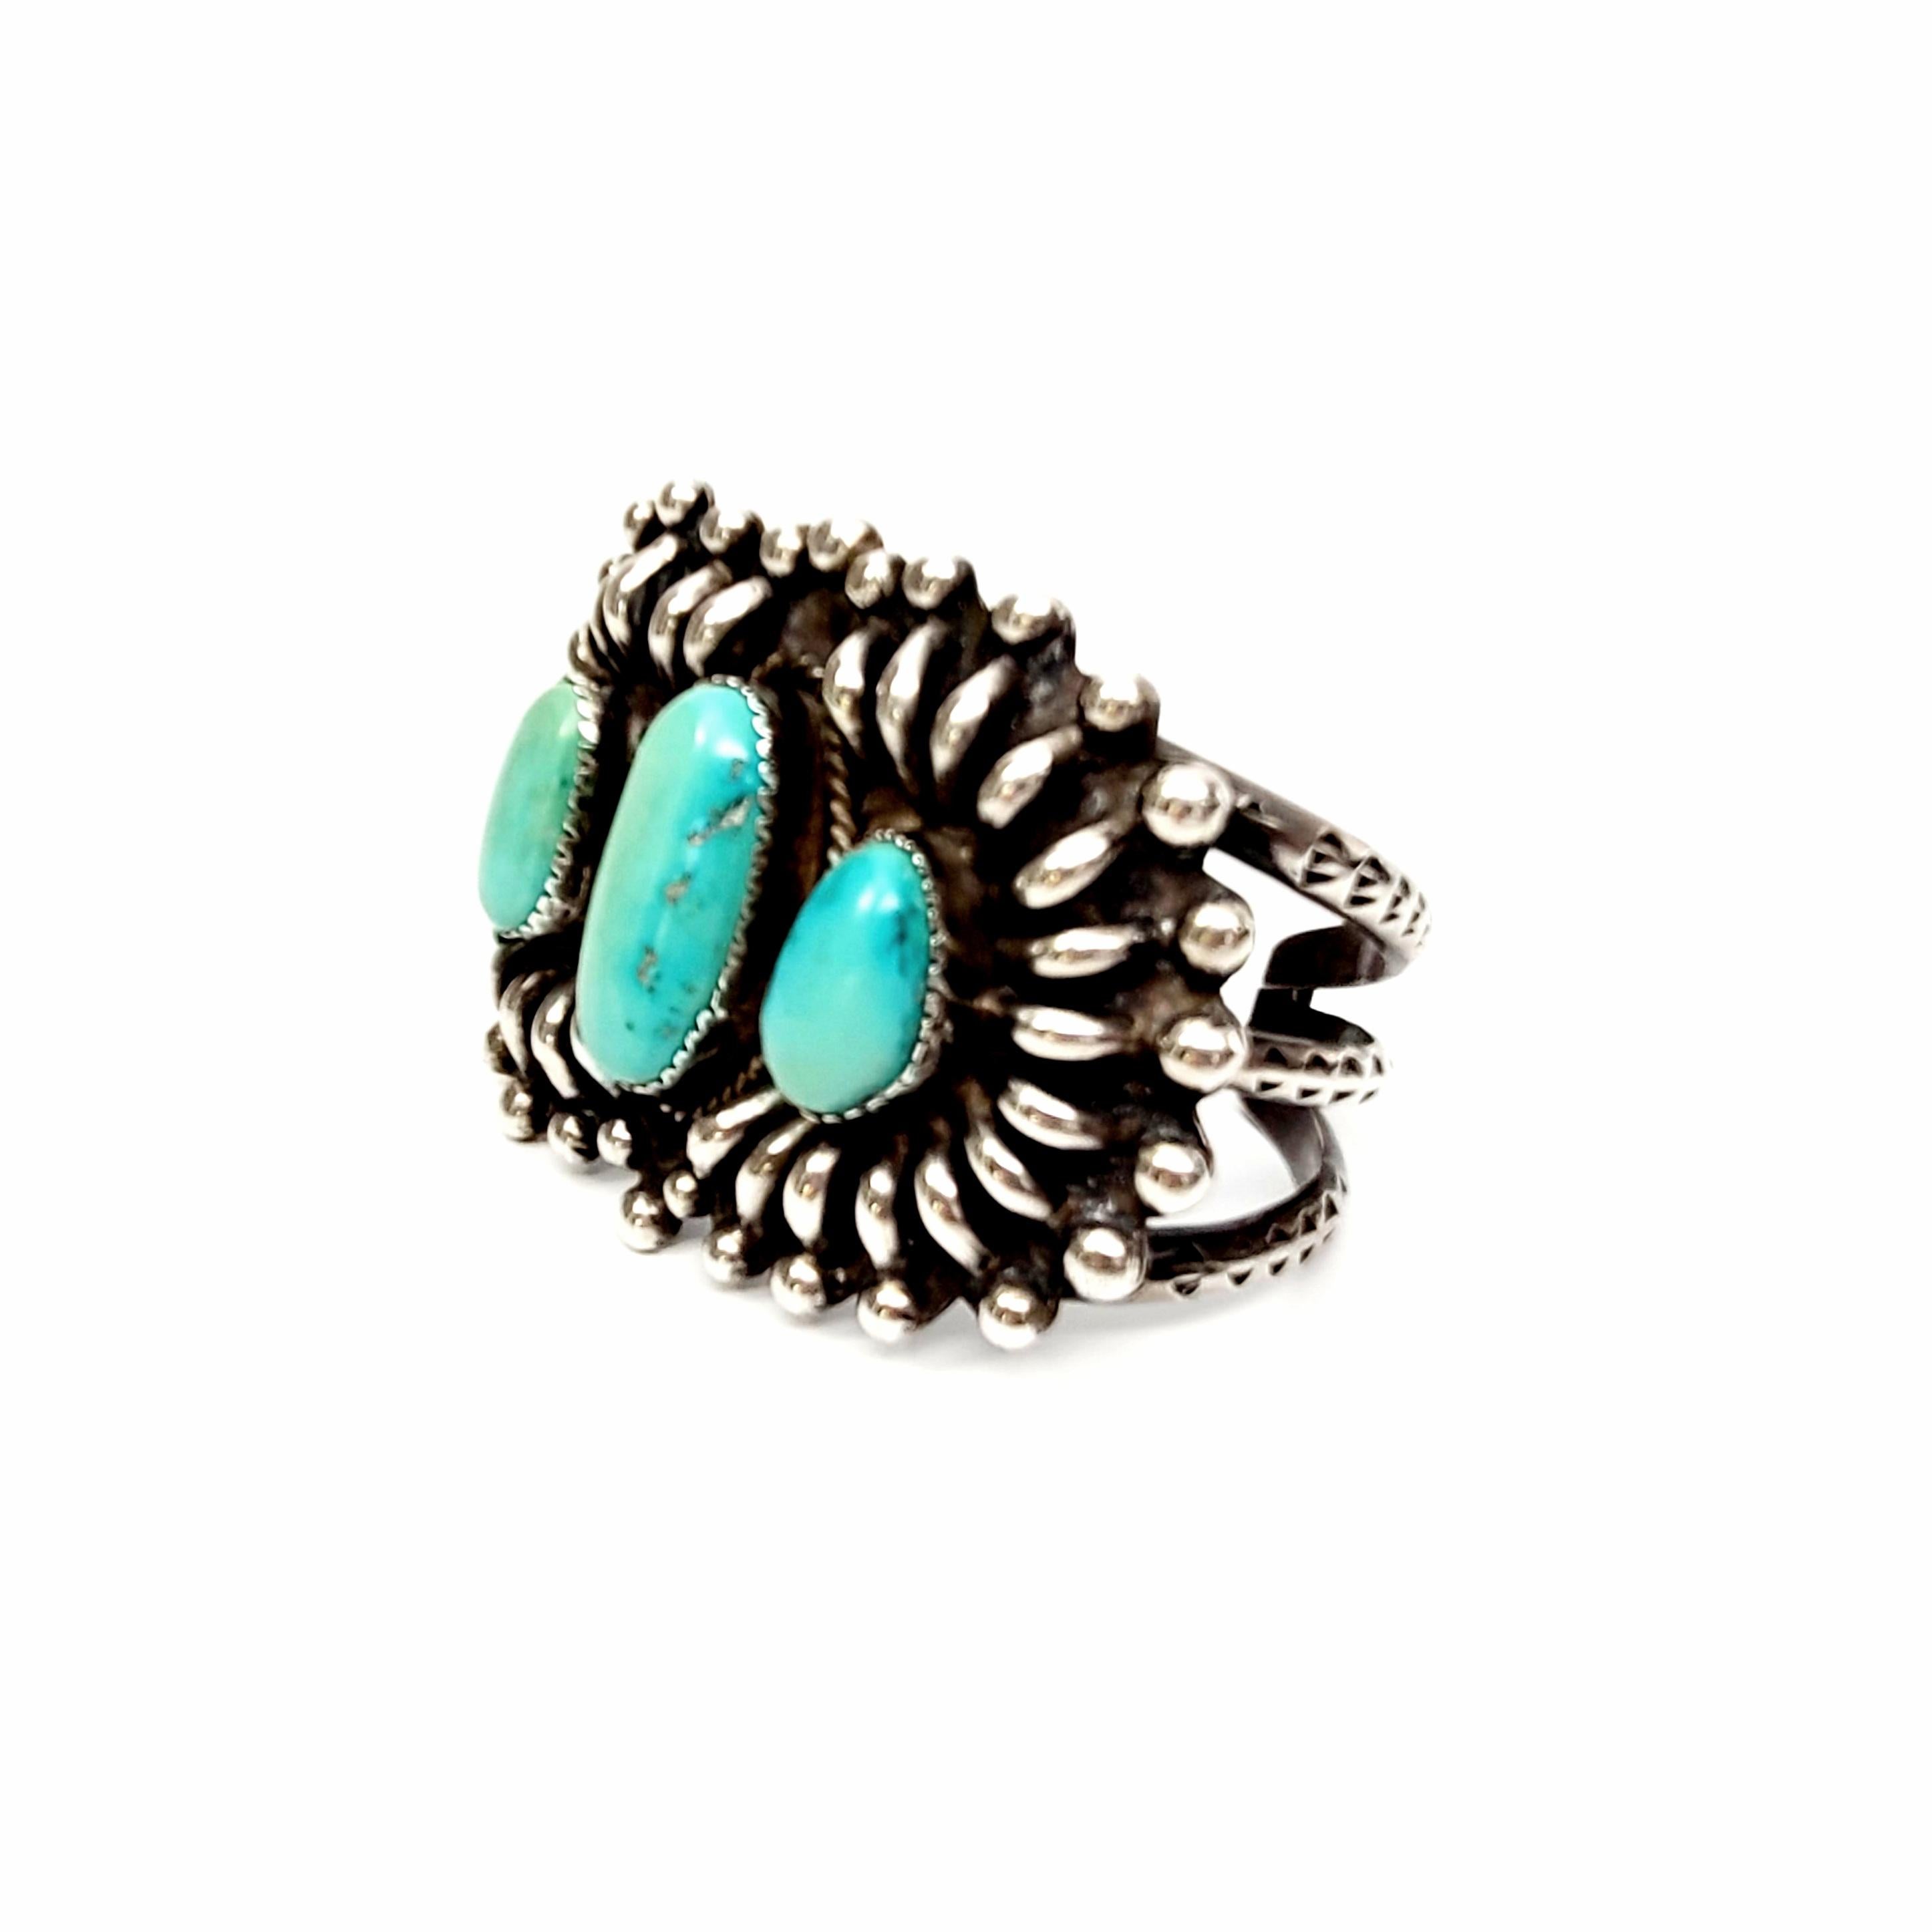 Sterling silver and turquoise cuff bracelet by Native American artisan, Daisy M Tsosie.

Gorgeous large cuff bracelet featuring 3 saw-tooth bezel set turquoise stones with rope texture accents and beautiful metalwork around the stone.

Measures